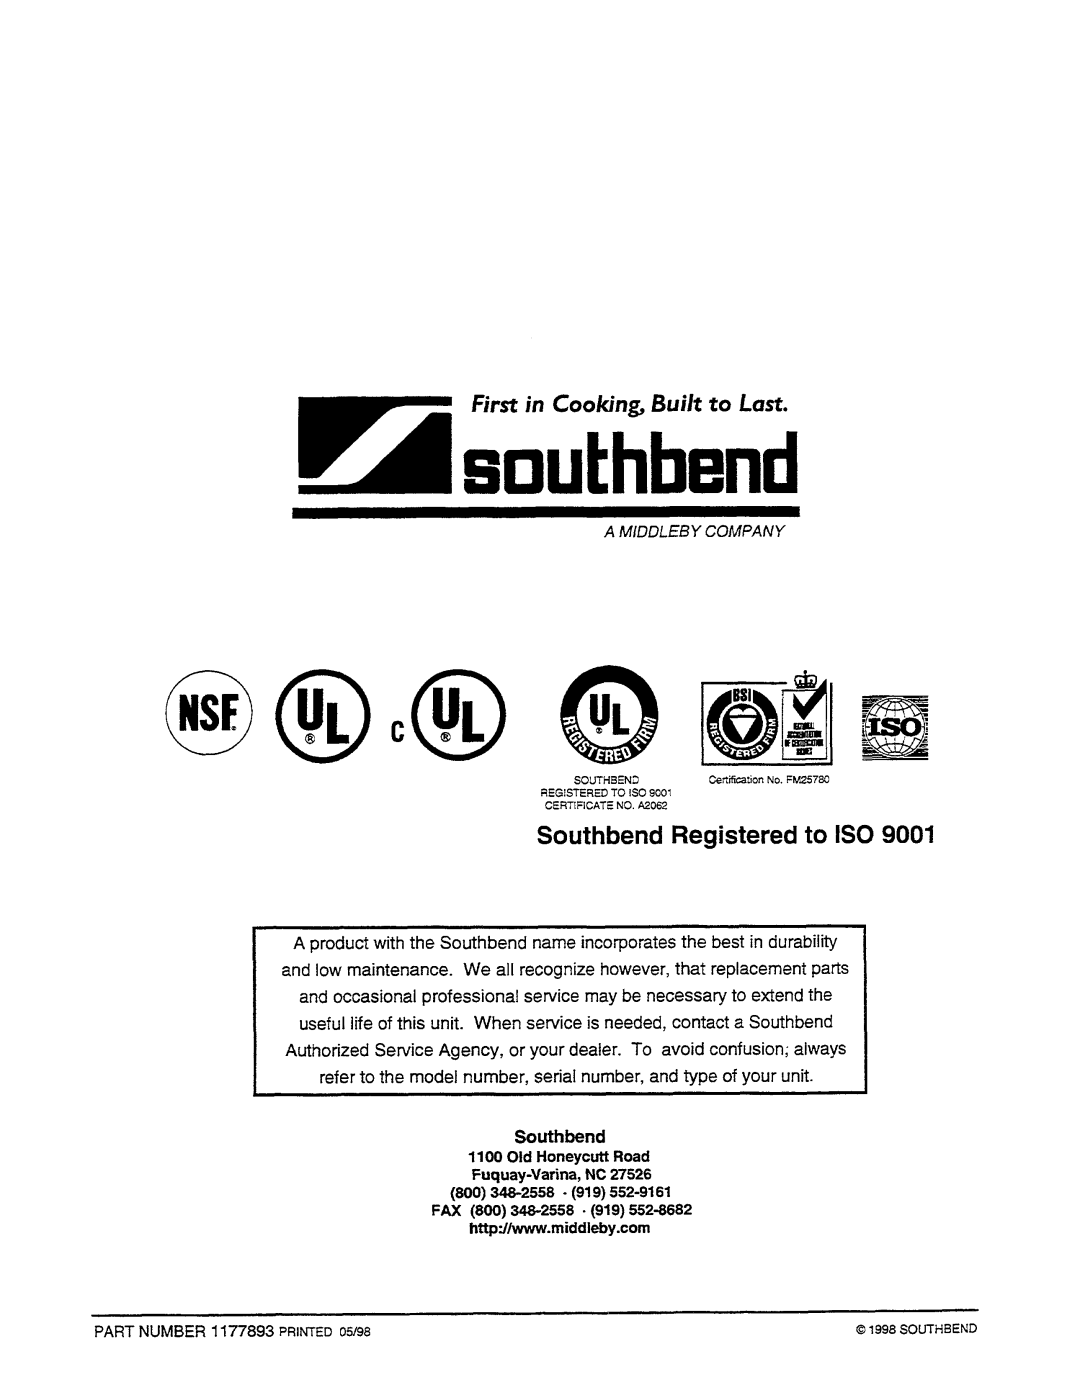 Southbend R2 manual Southbend Registered to IS0 